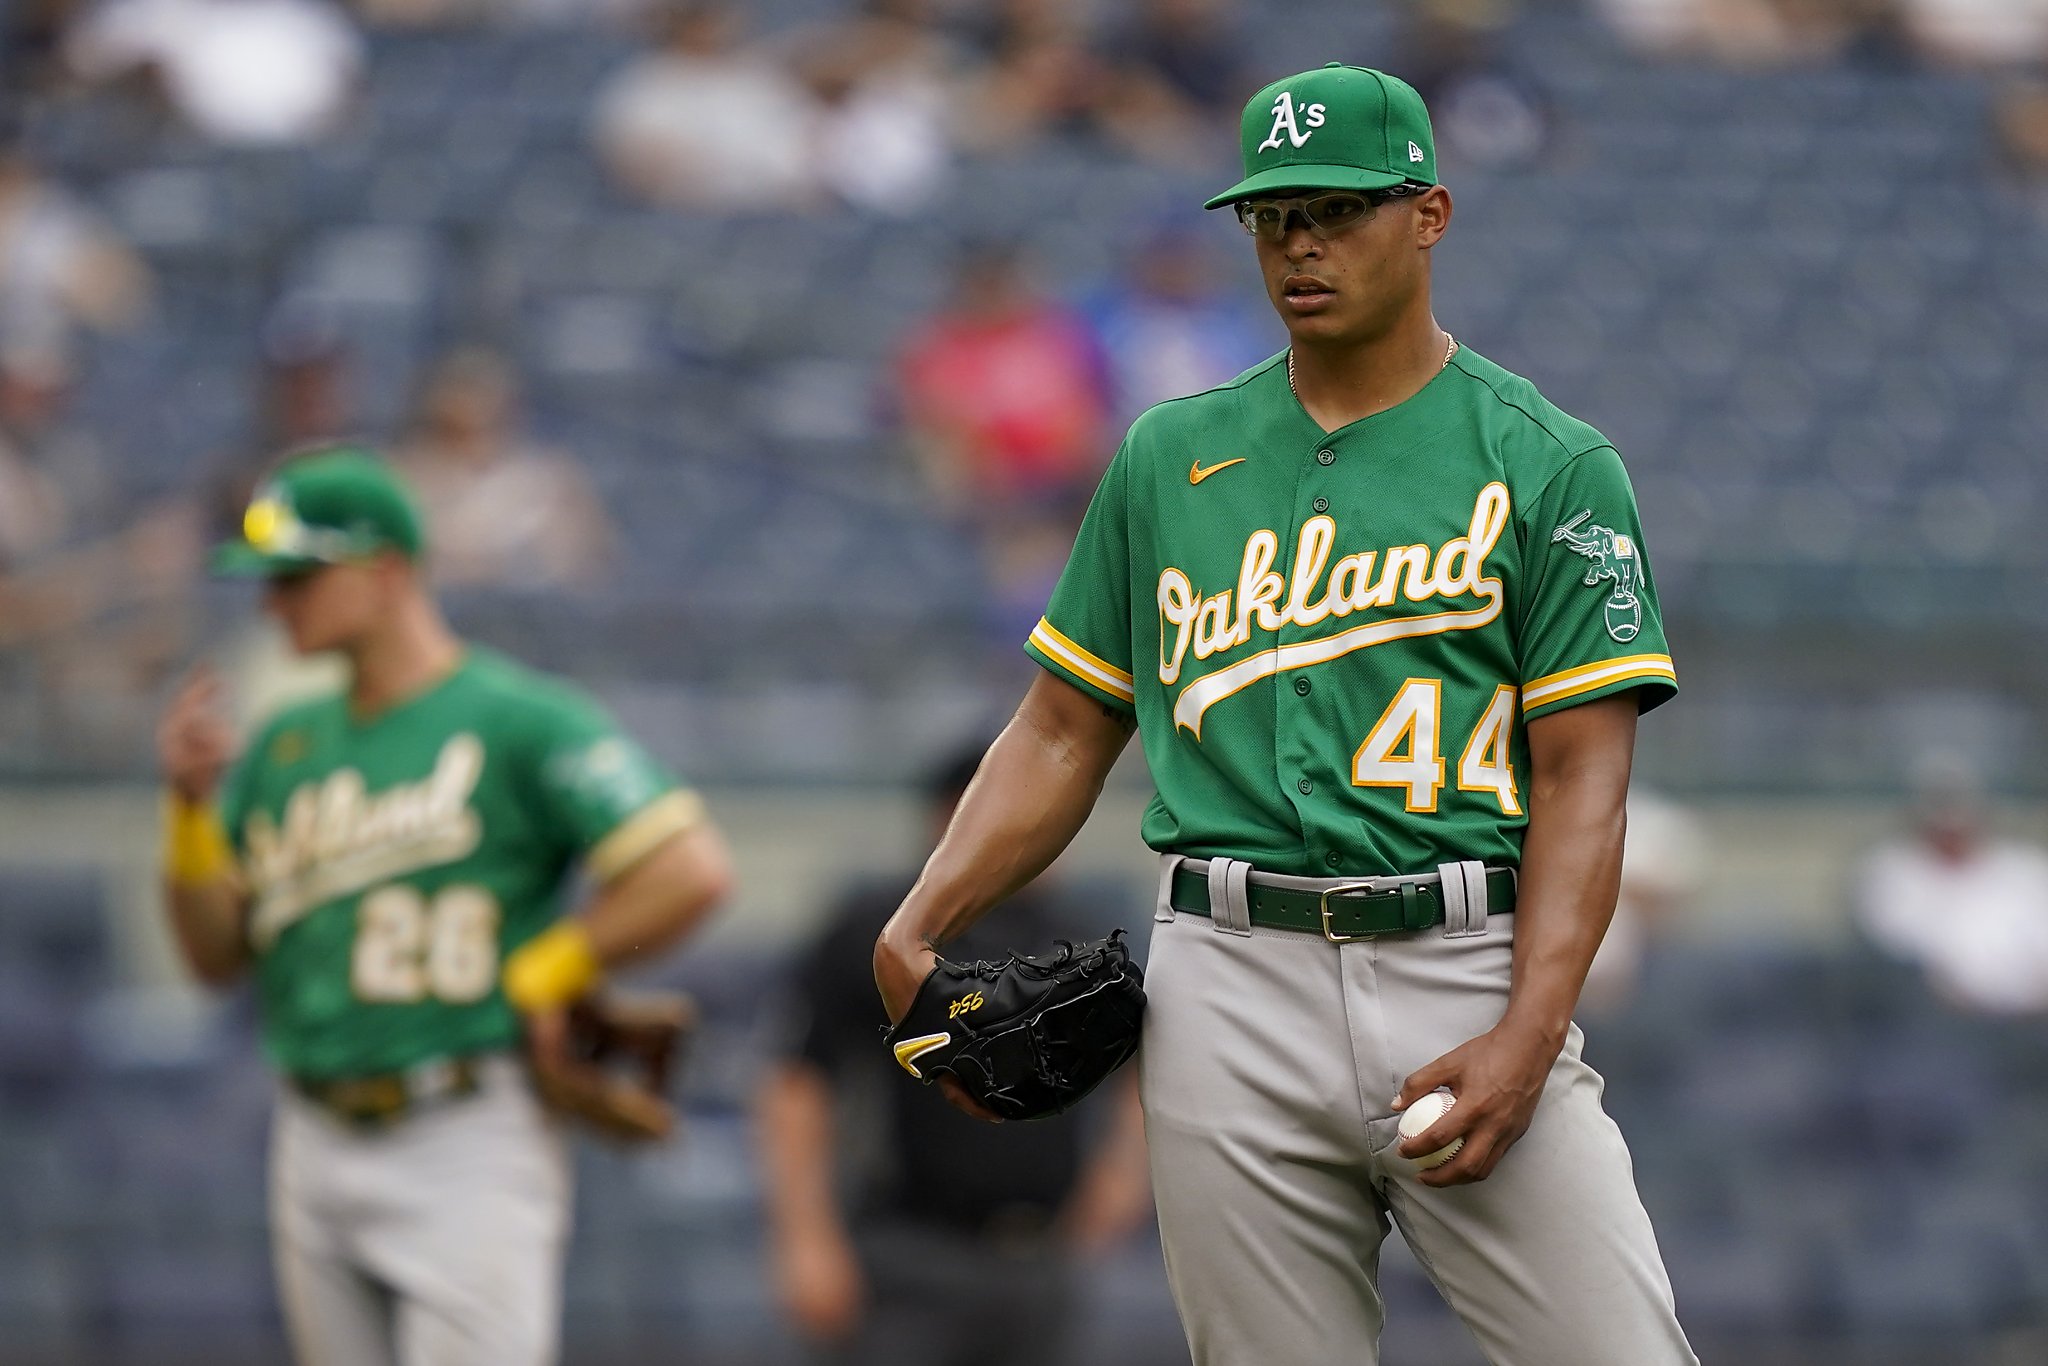 Forced to reach deep, A's bullpen falters in late-innings loss to